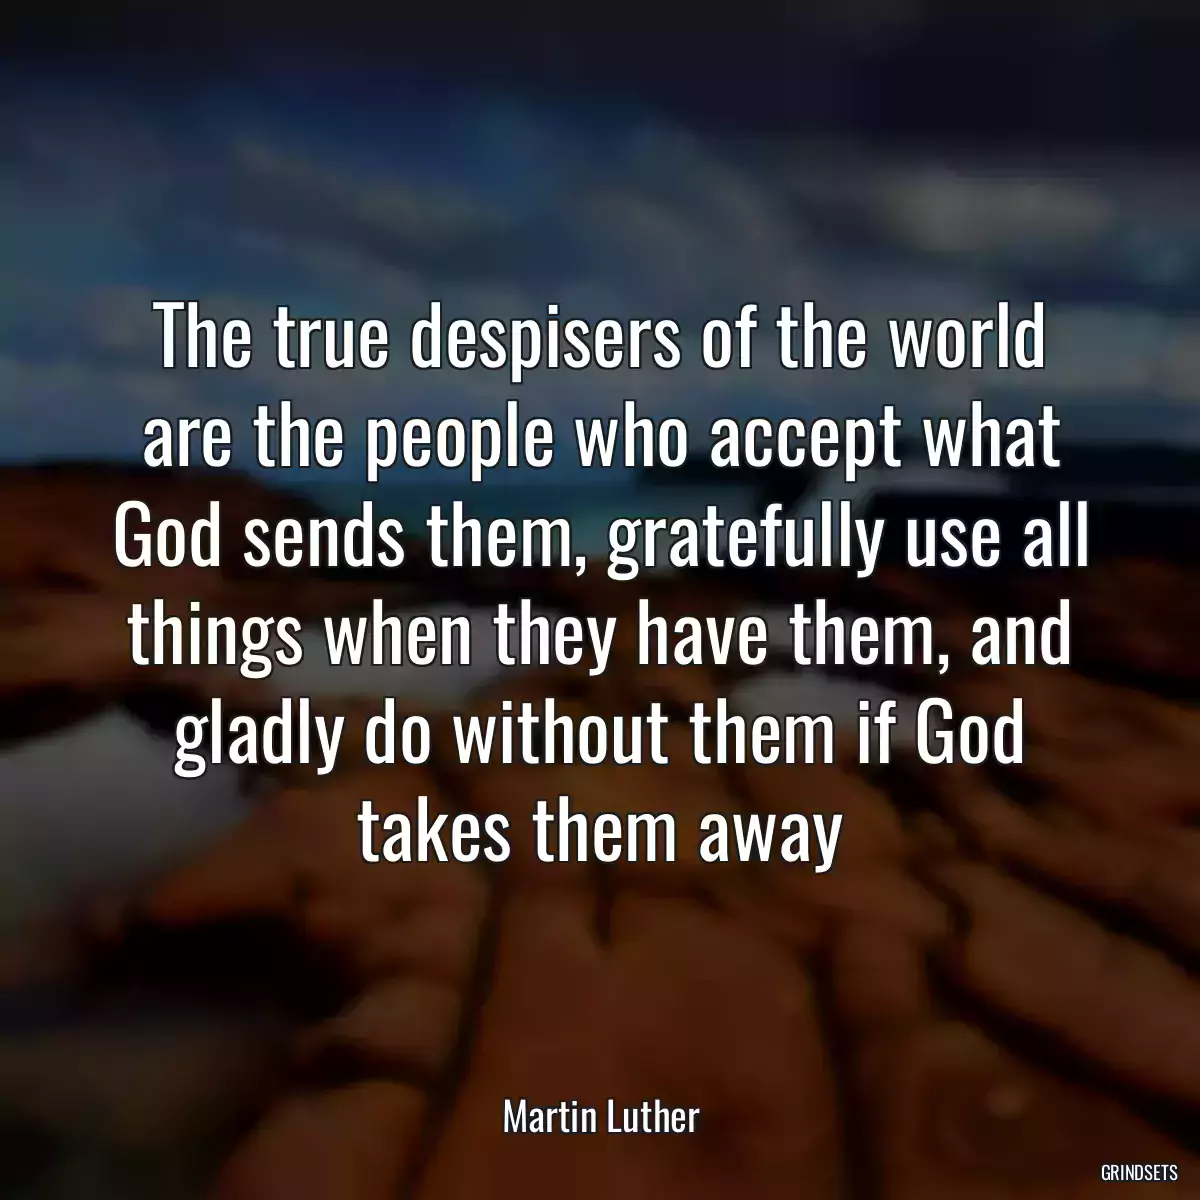 The true despisers of the world are the people who accept what God sends them, gratefully use all things when they have them, and gladly do without them if God takes them away